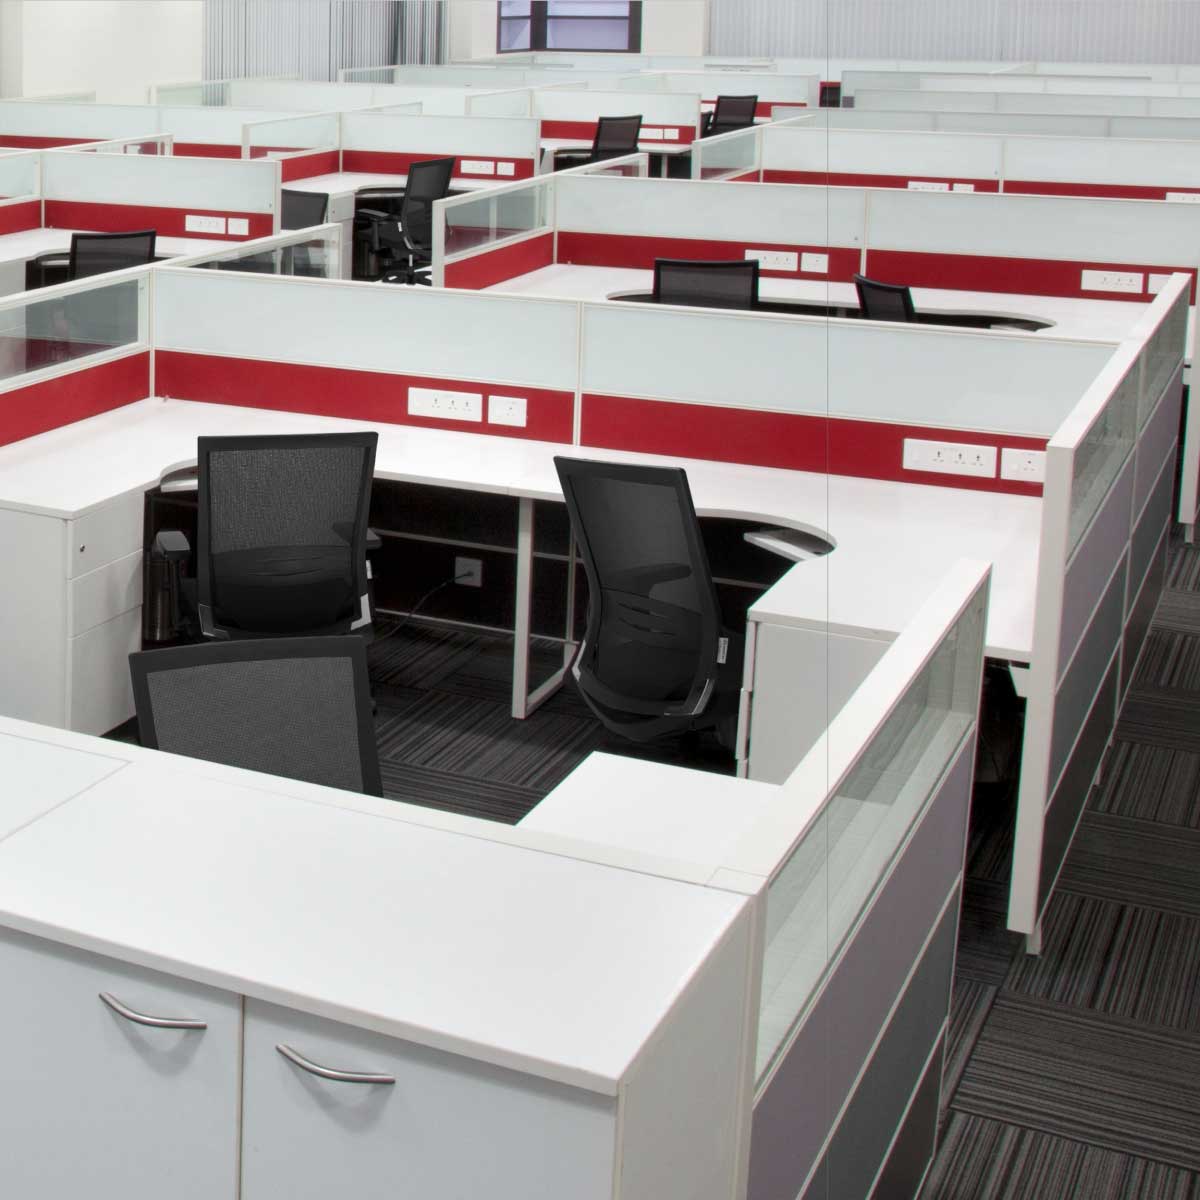 Computer Workstation Furniture Manufacturers, Suppliers in Faridabad Sector 15